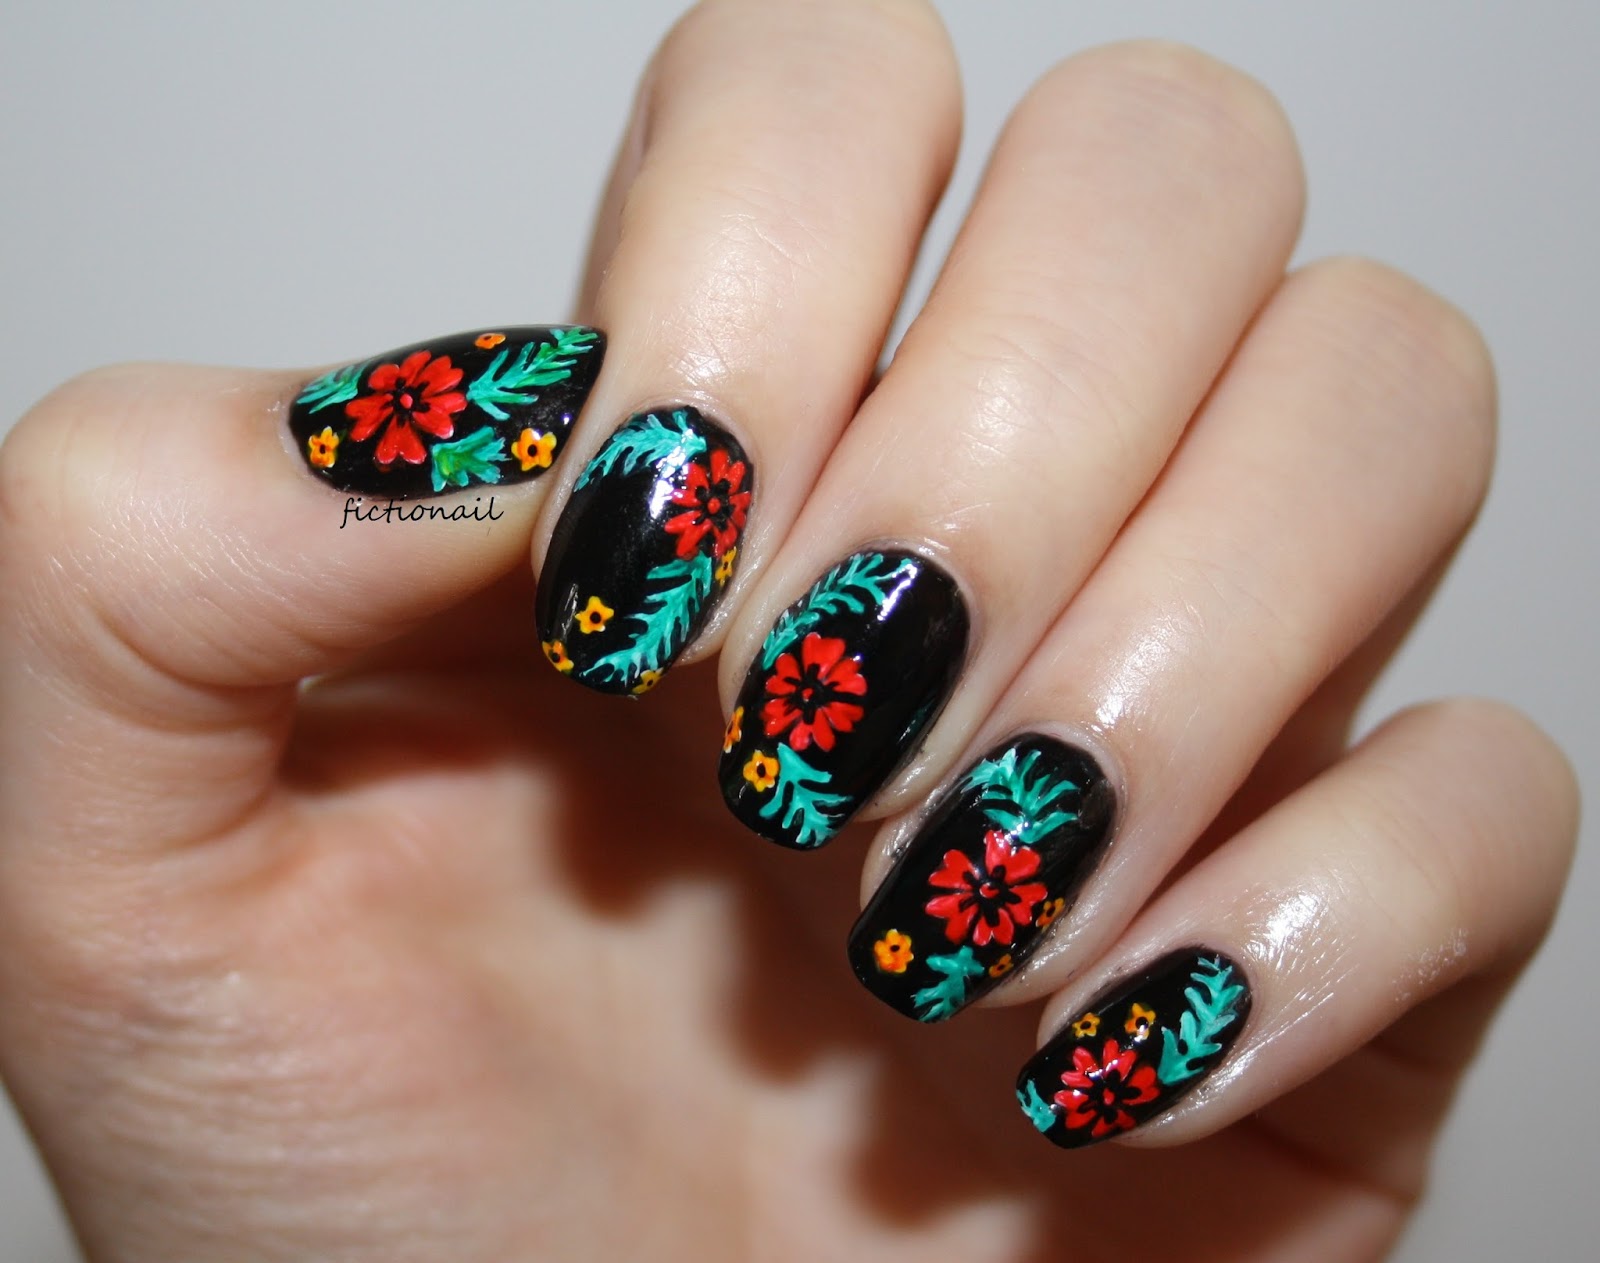 5. Tropical Flower Nail Designs - wide 3